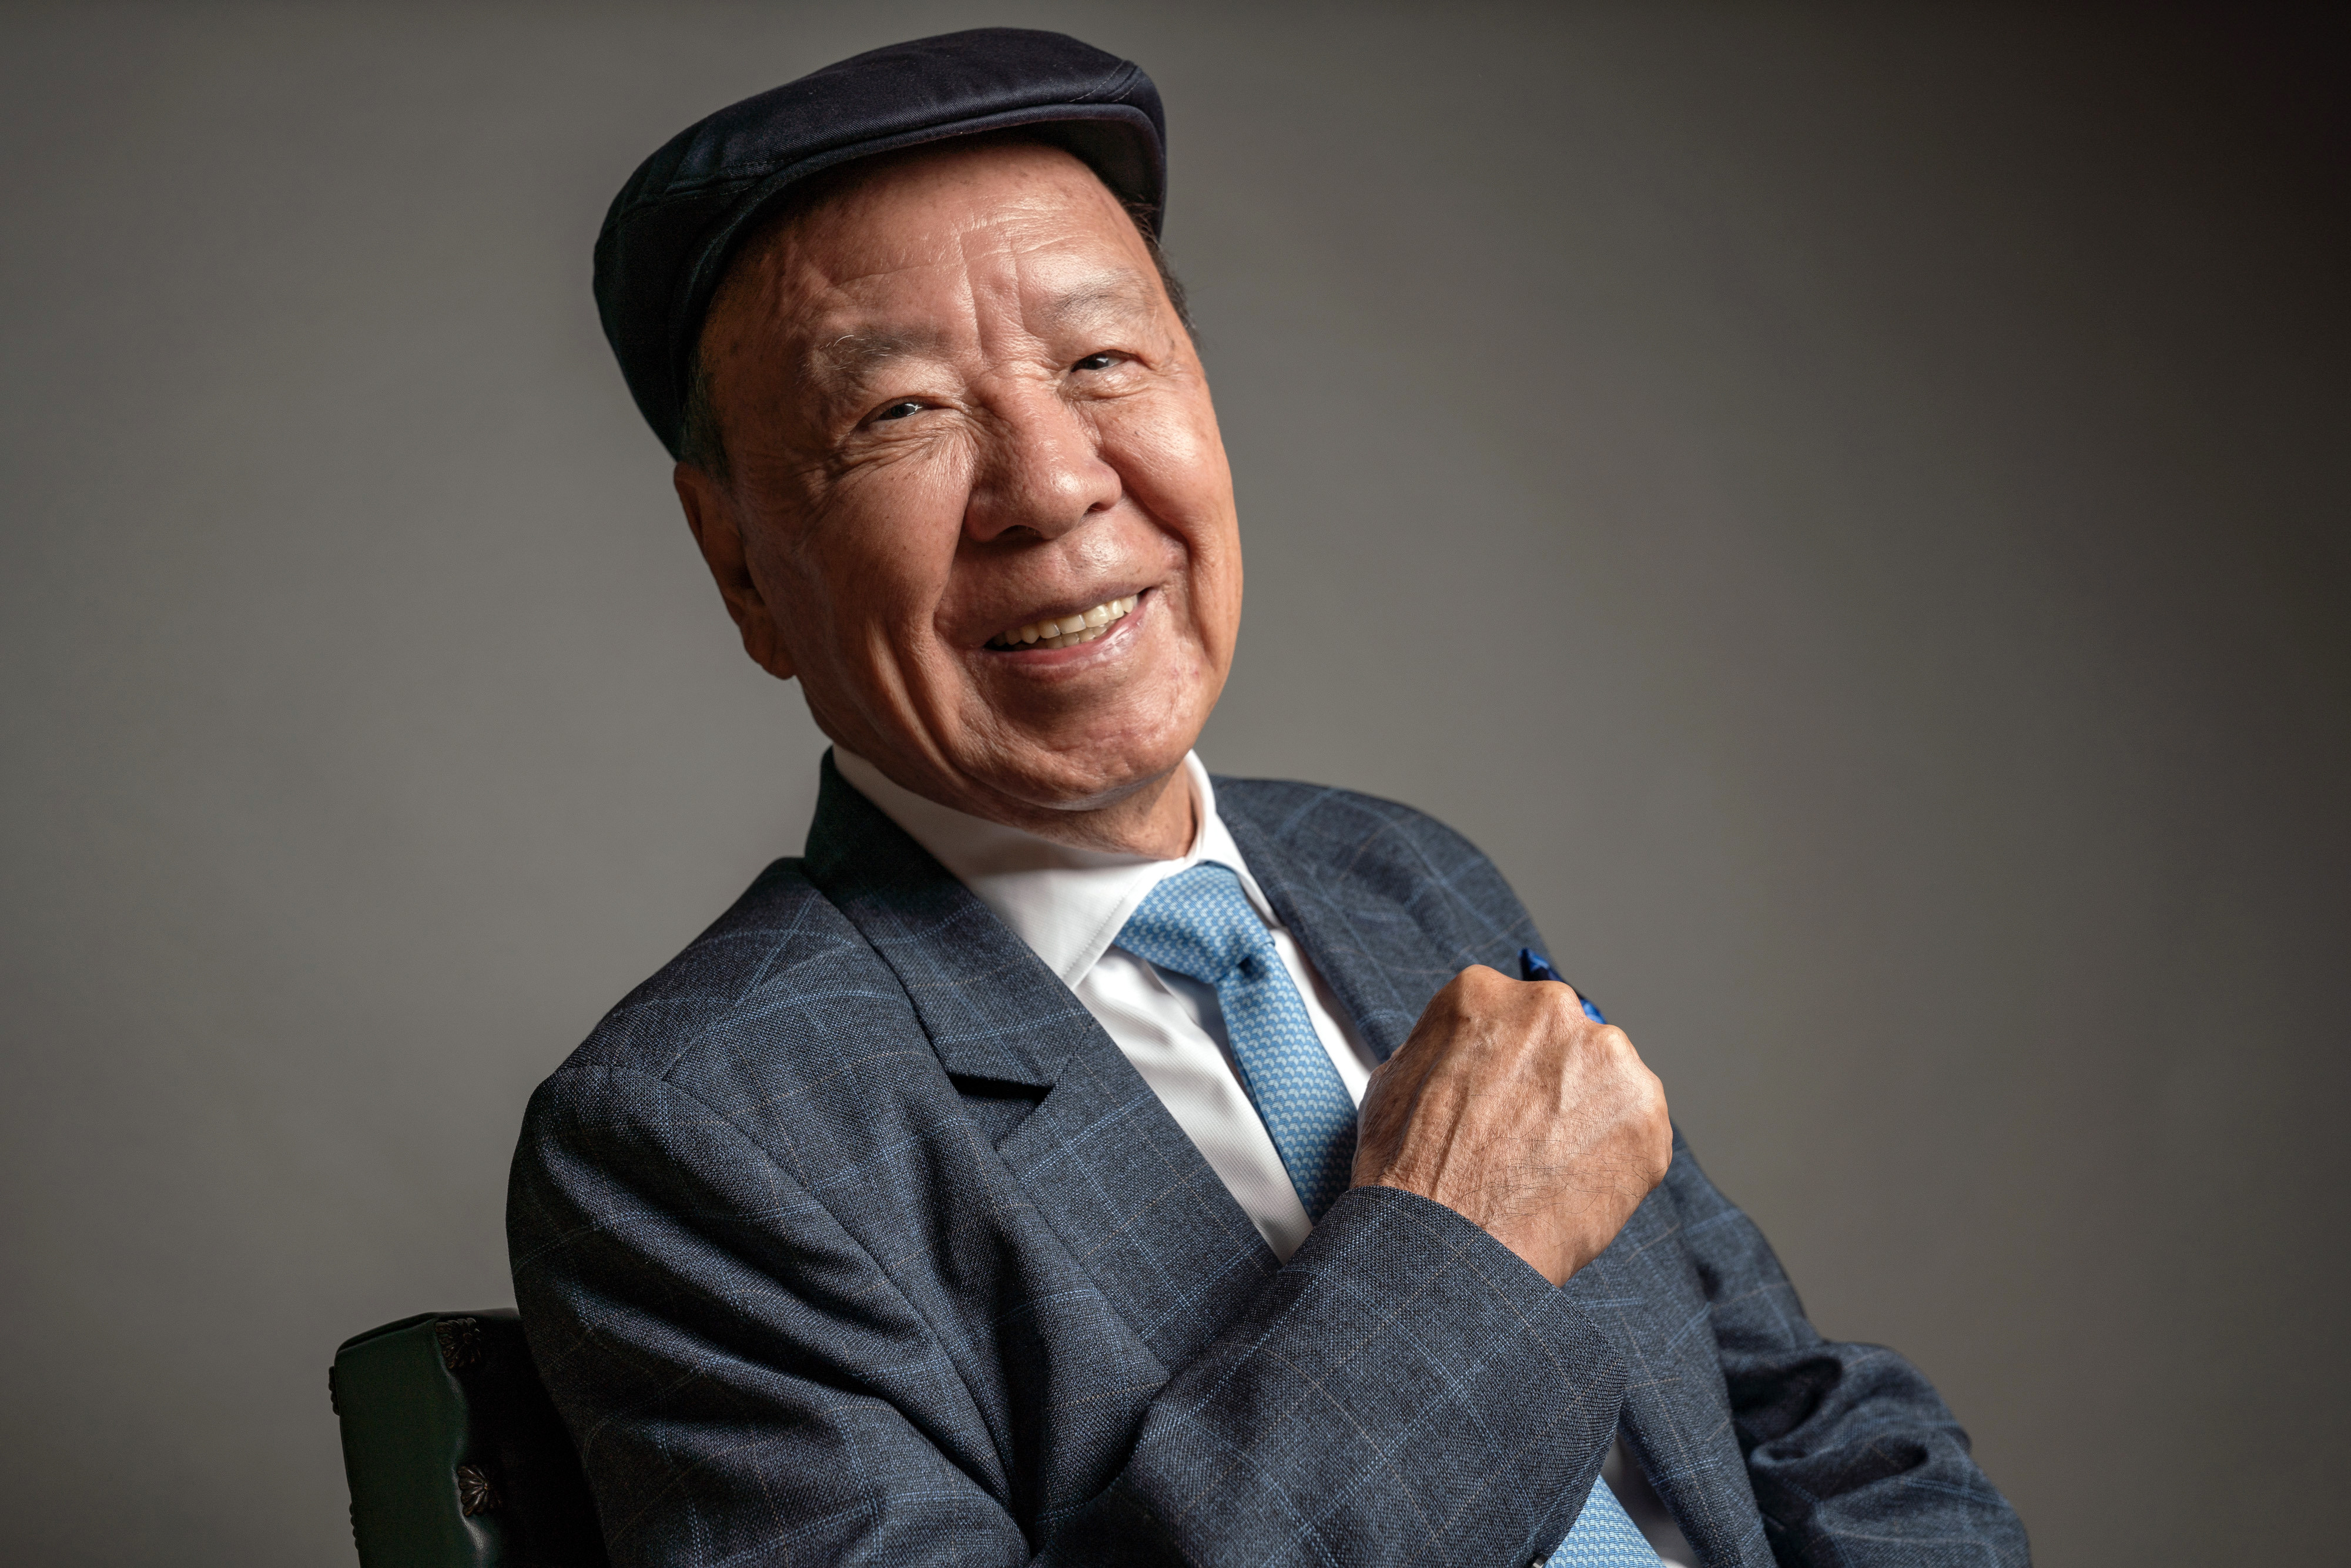 Lui Che-Woo, the chairman of K Wah International as well as Galaxy Entertainment Group. Photo: Bloomberg